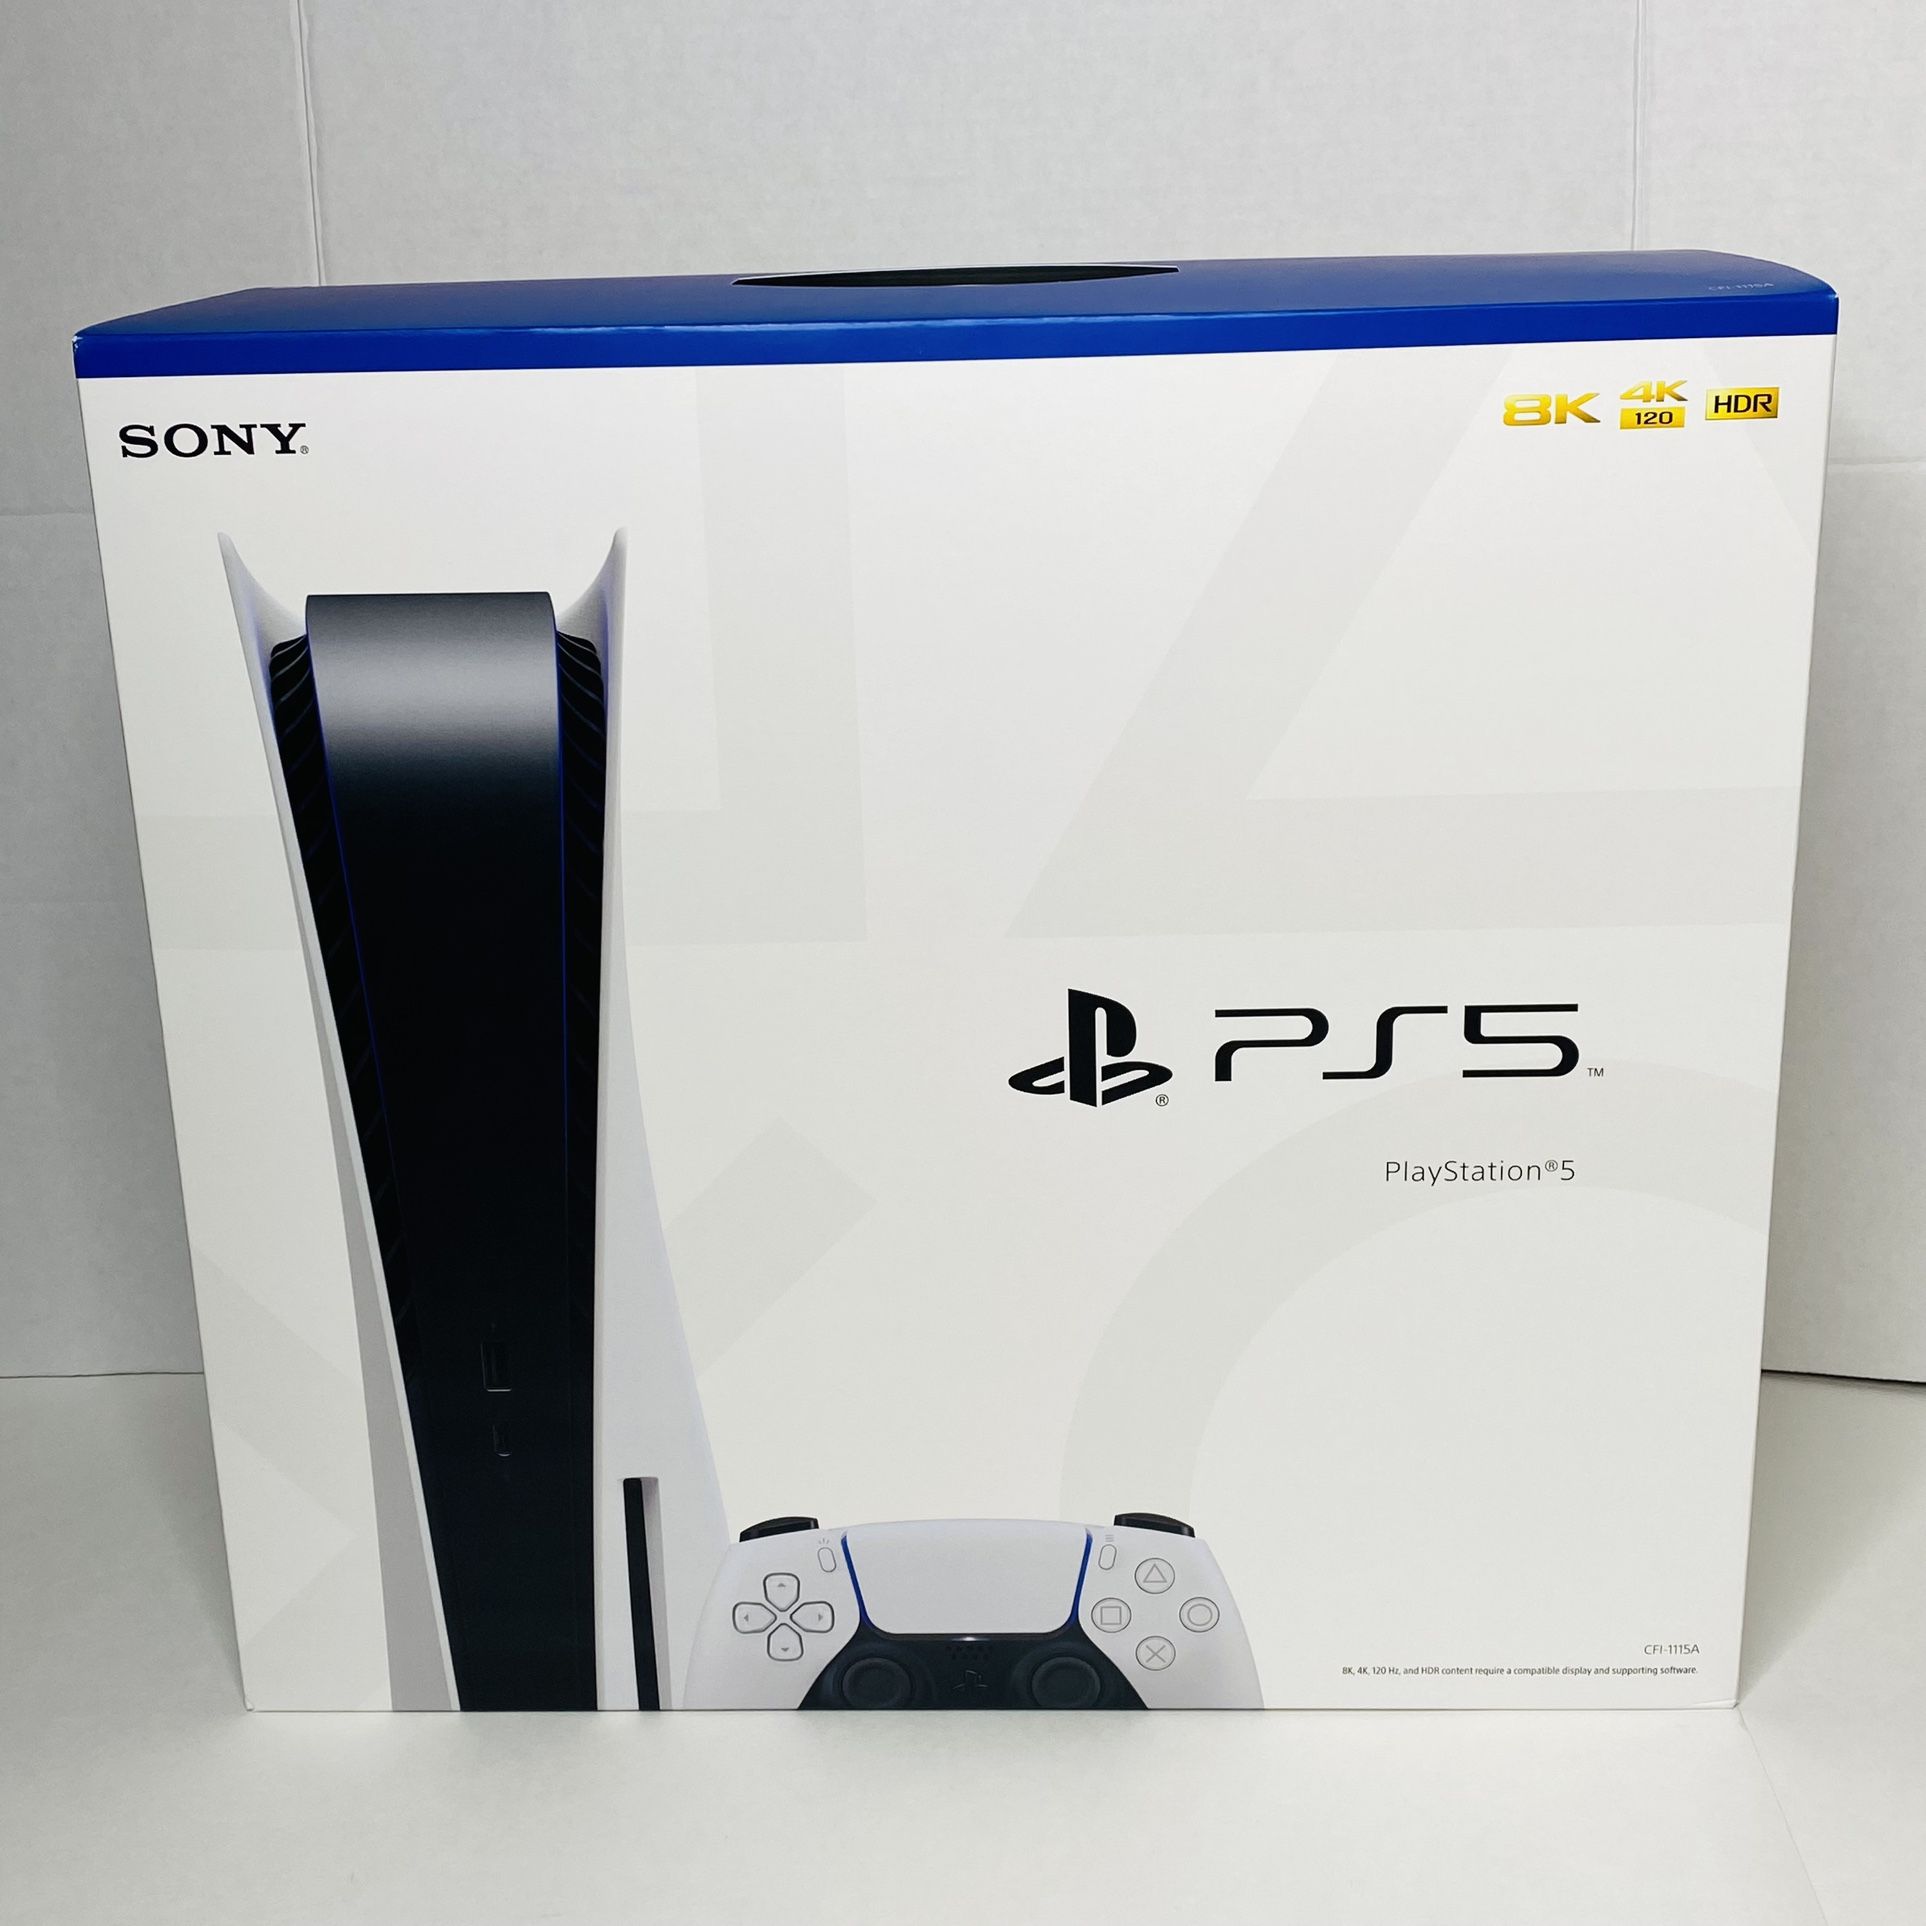 FOR TRADE ONLY- PlayStation 5 Disc Version Console BRAND NEW IN BOX Never Opened or Used